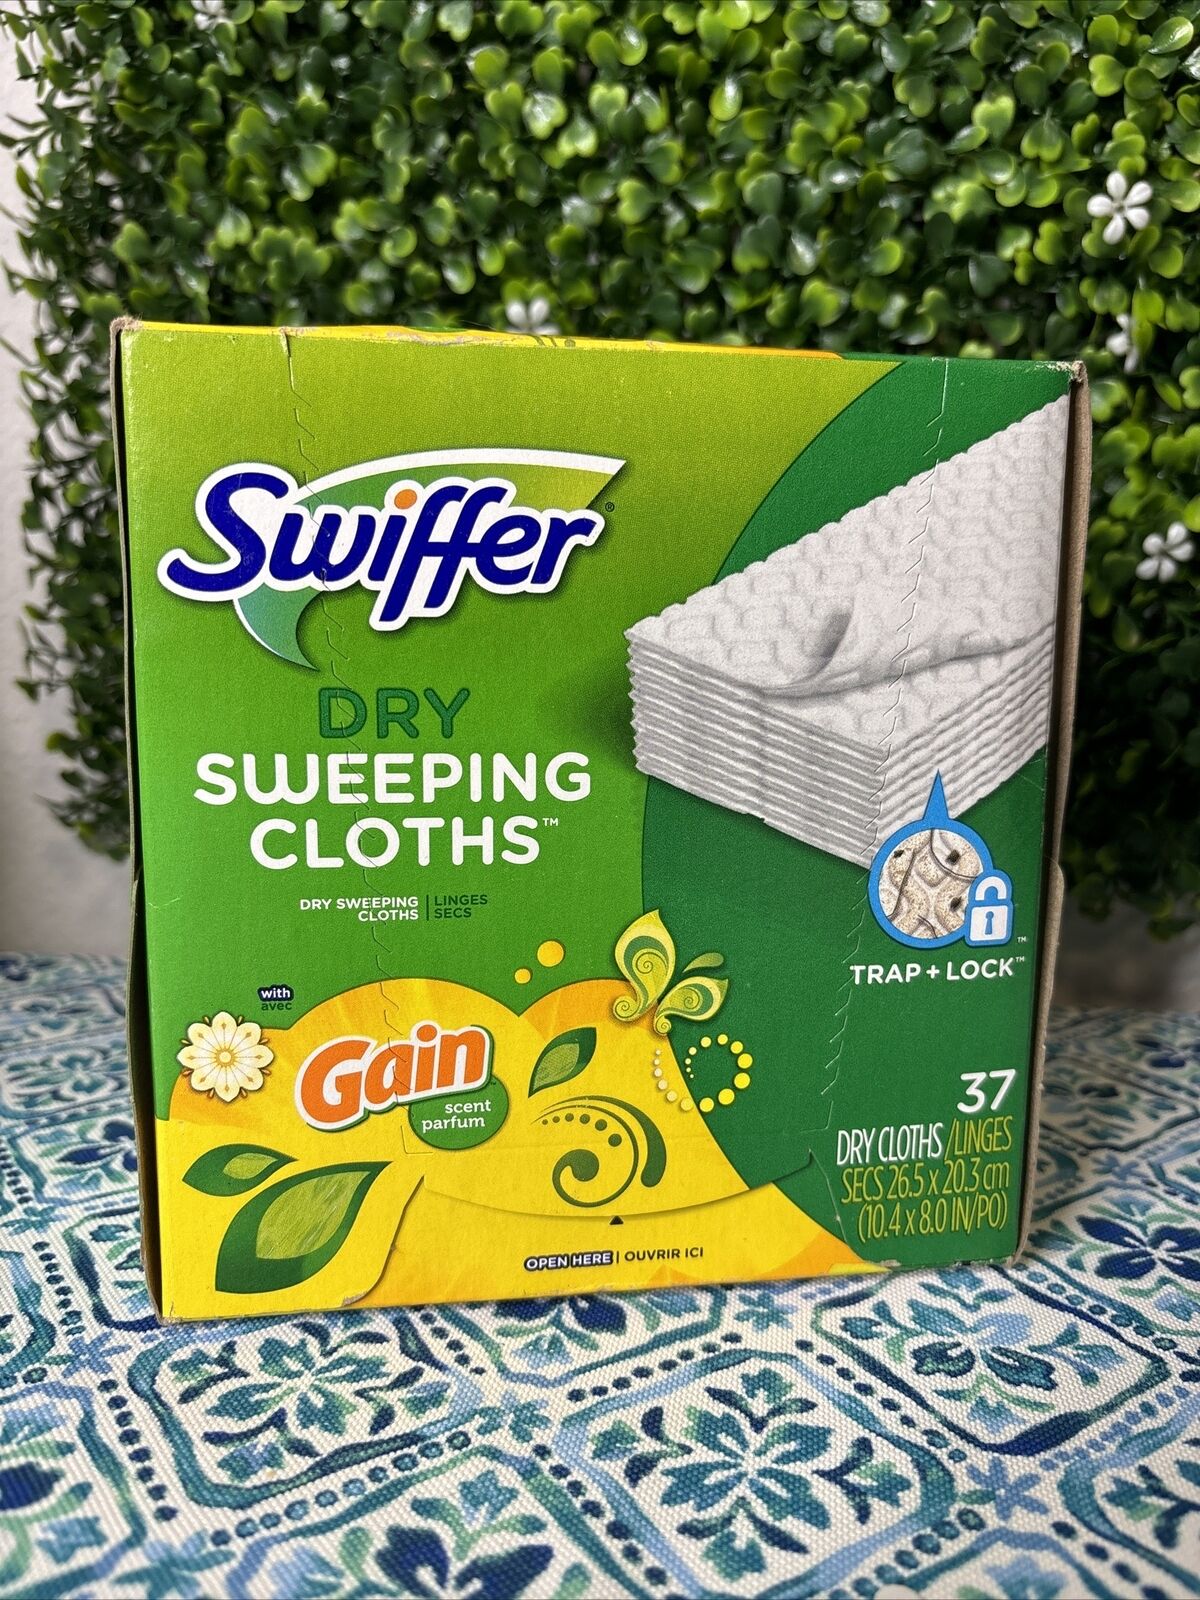 Swiffer Dry Sweeping Cloths 37 Ct Scent Gain New